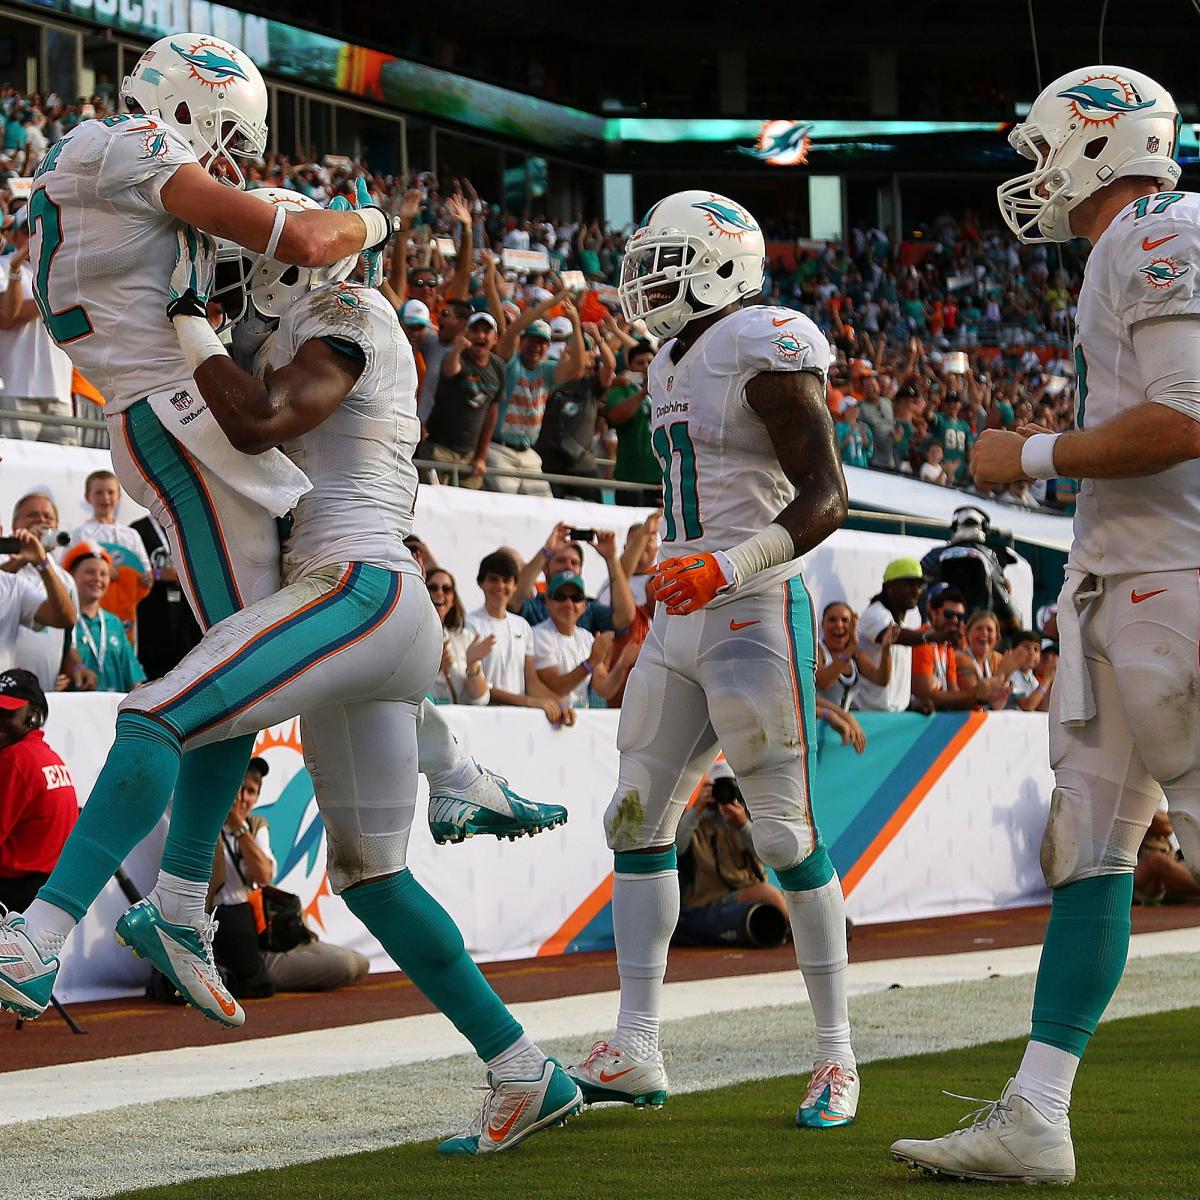 Here are the highlights — and mishaps — from Dolphins backups in